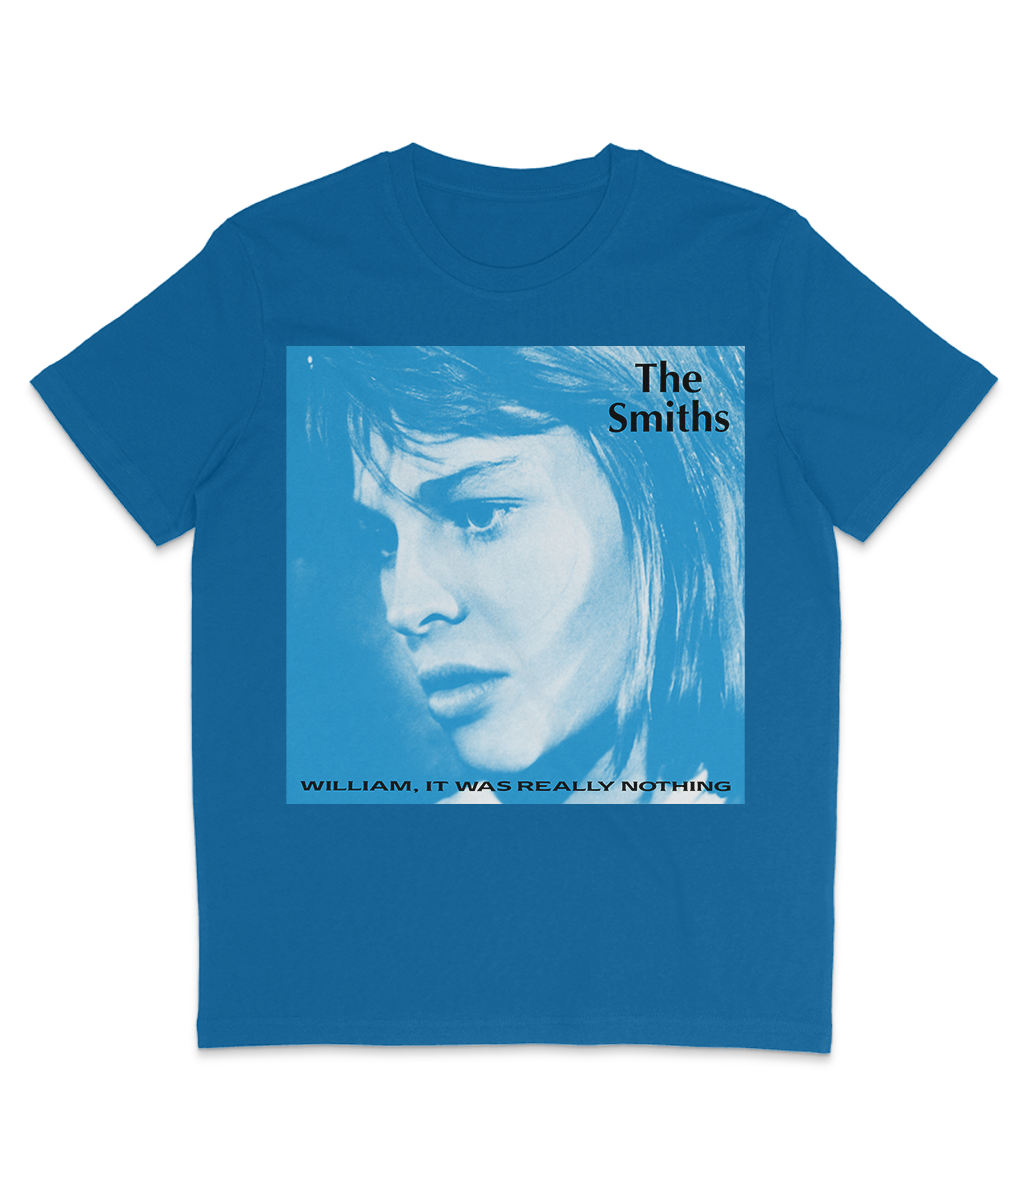 The Smiths - William, It Was Really Nothing - Julie Christie - Blue